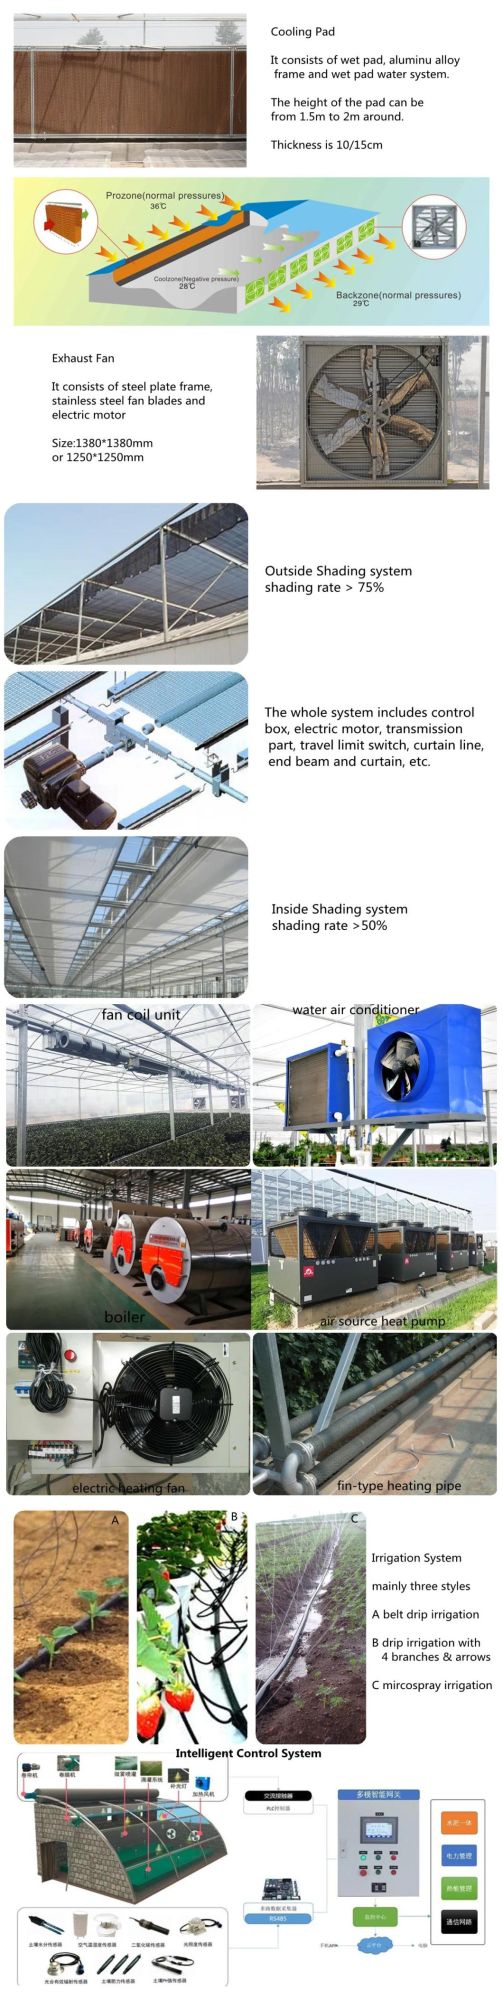 Modern Facility for Greenhouse Seedling Tray Sowing Seedling Machine for Different Sizes of Seeds Sowing for Farming/Agriculture